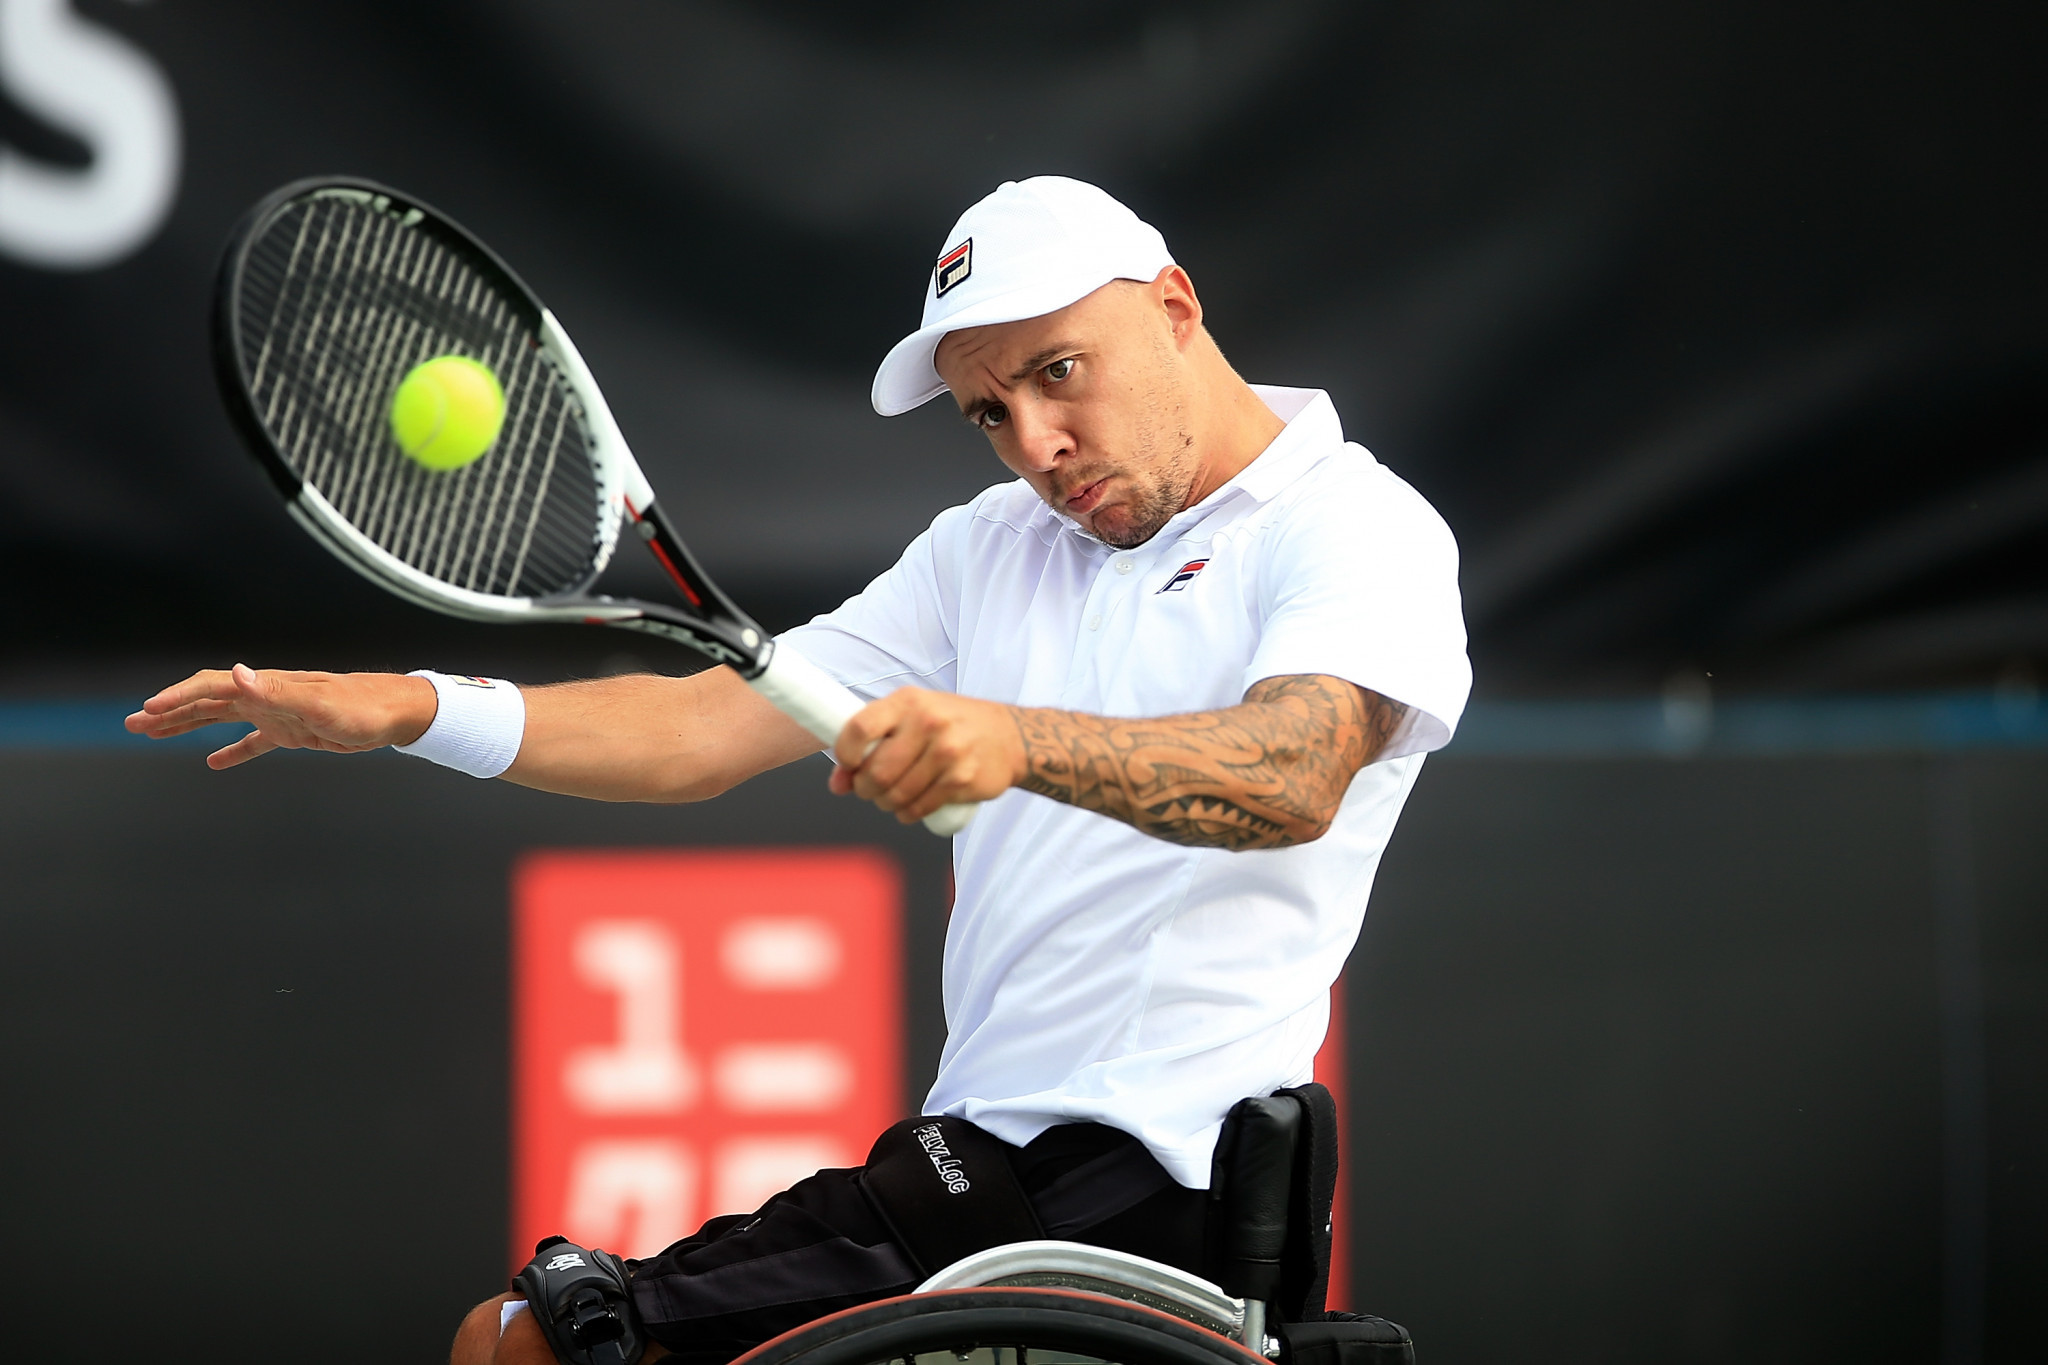 Andy Lapthrone was one of many British players in action on day two of the British Open Wheelchair Tennis Championships in Nottingham ©Getty Images